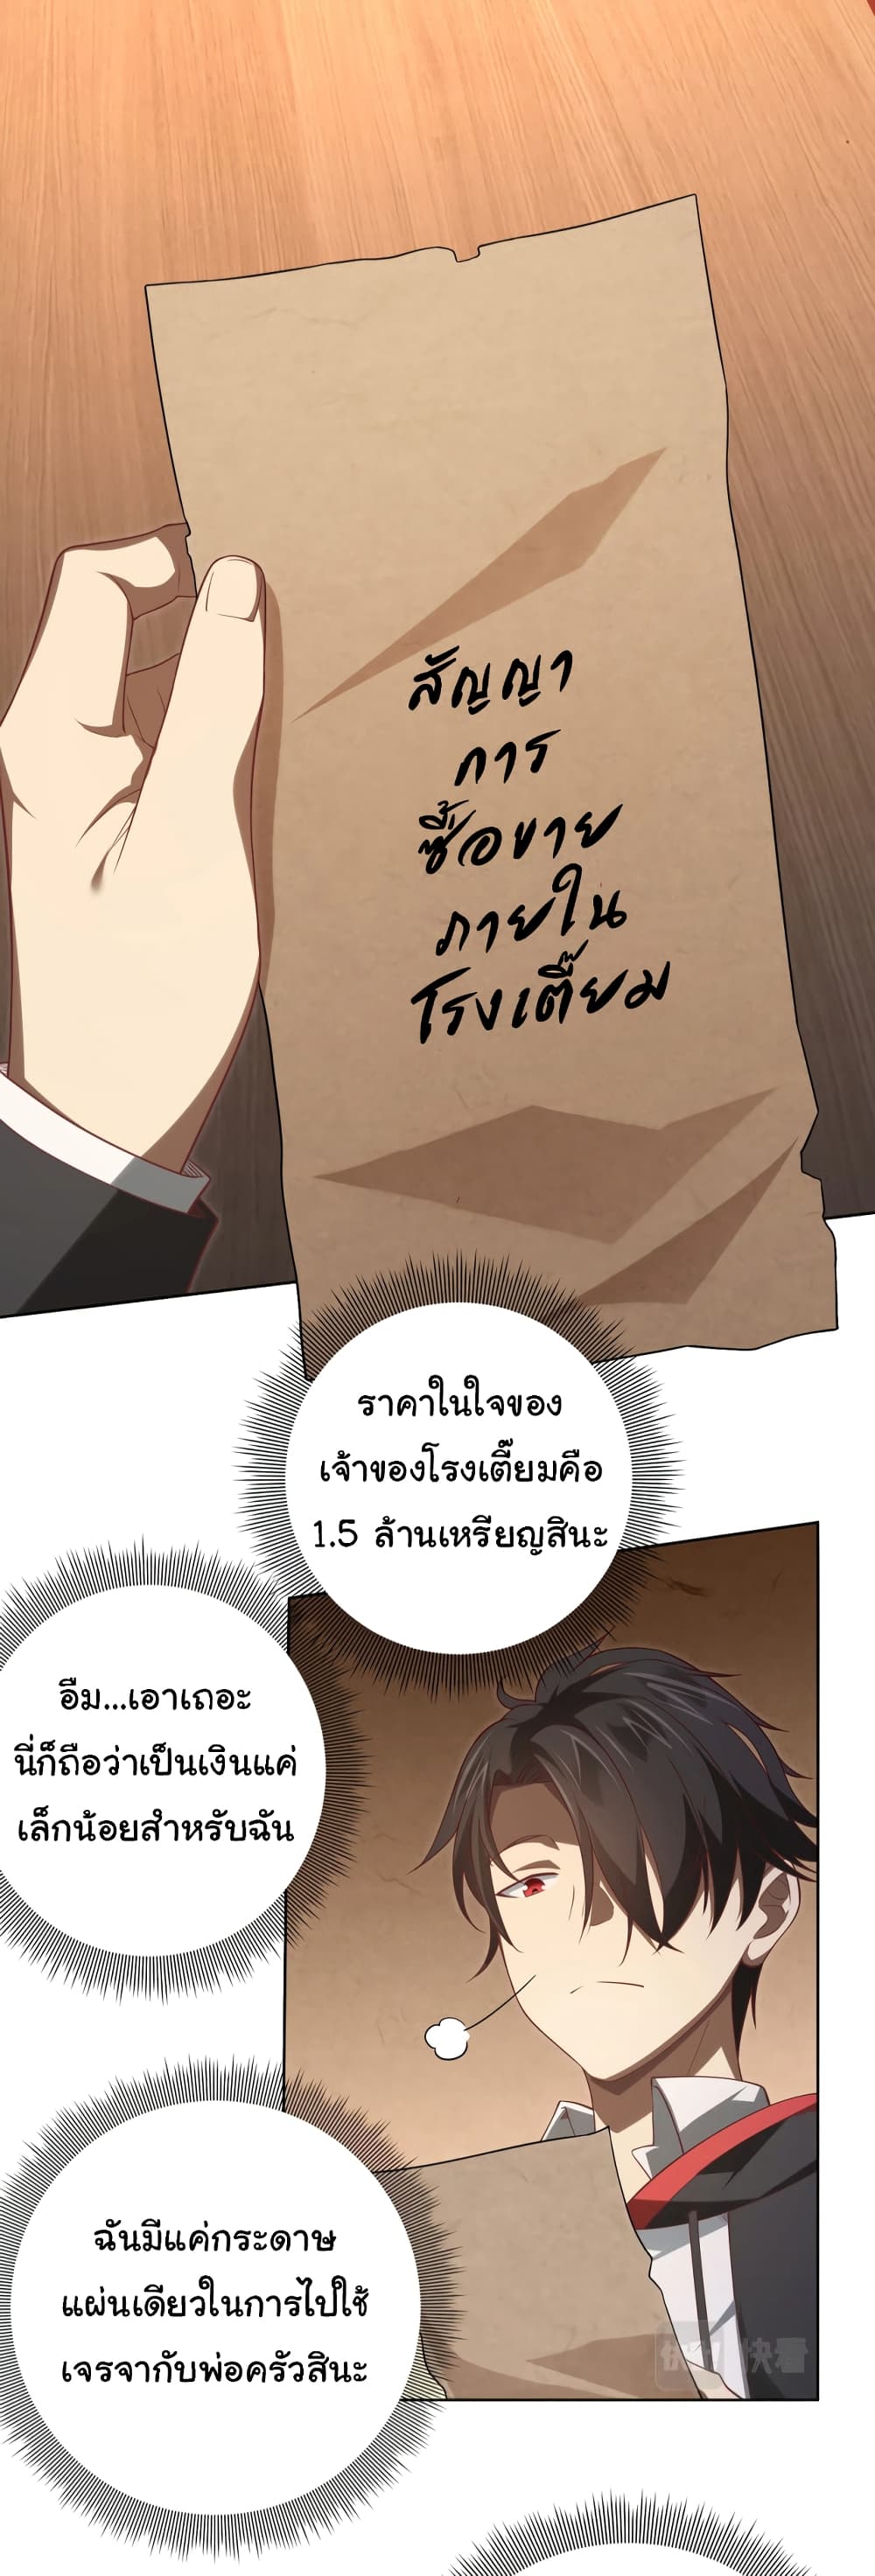 Start with Trillions of Coins ตอนที่ 9 (11)